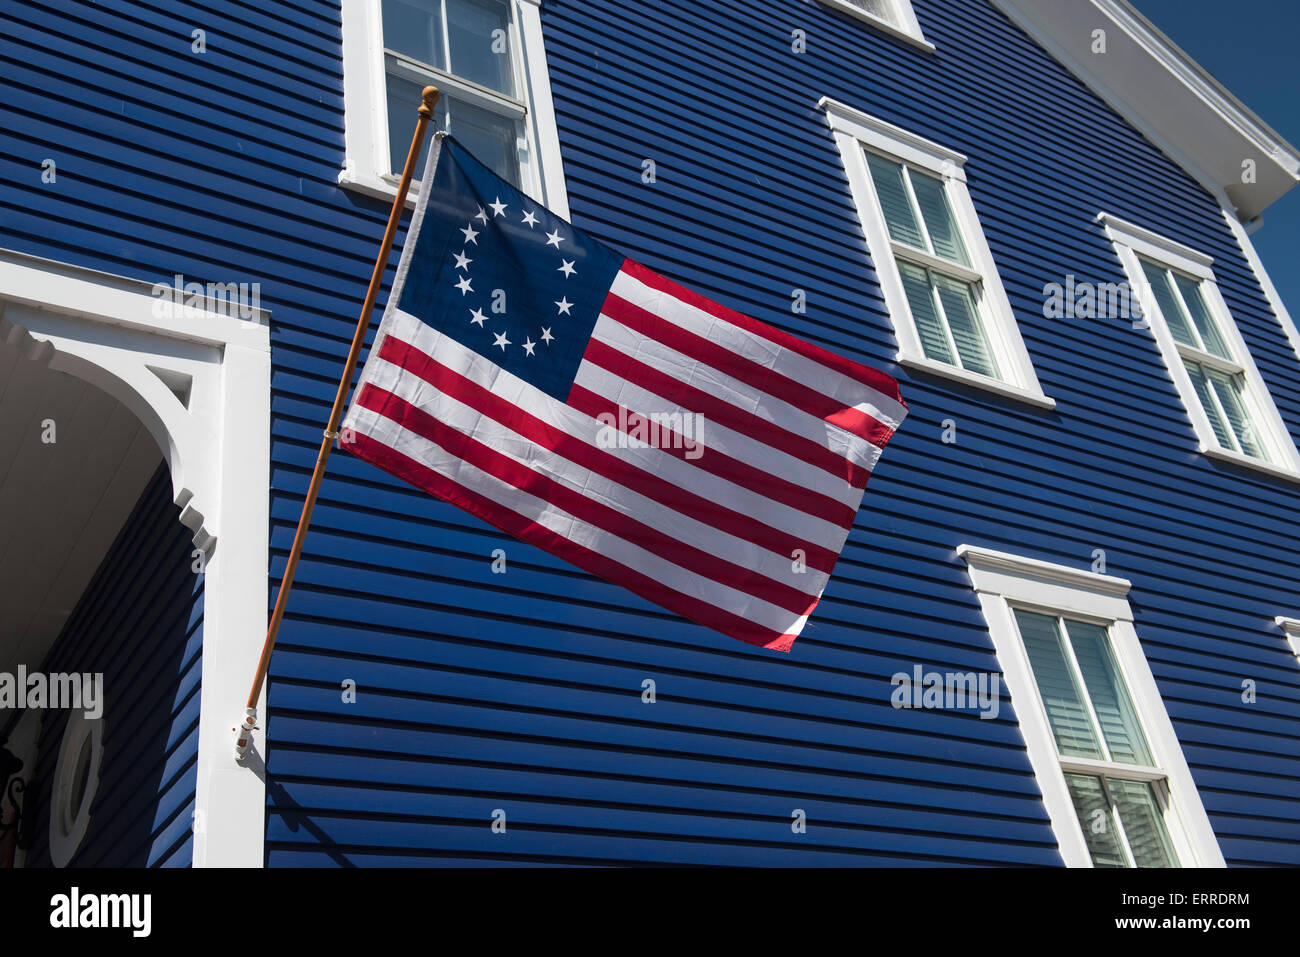 A Betsy Ross flag, representing the 13 original colonies. Memorial Day weekend 2015 in Newport, Rhode Island. Stock Photo